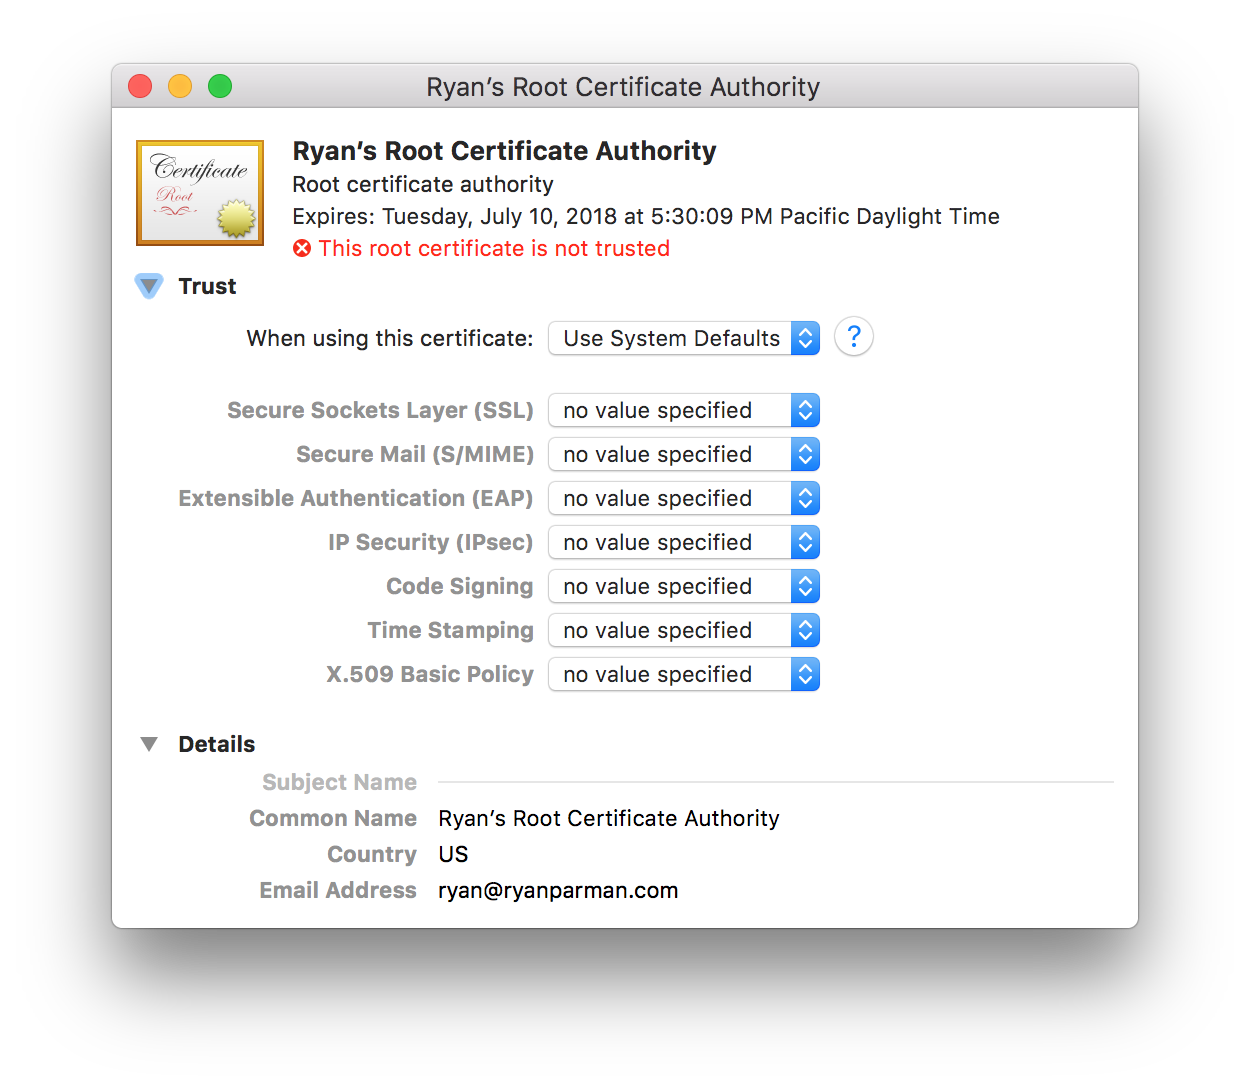 Trust options for Certificate Authority